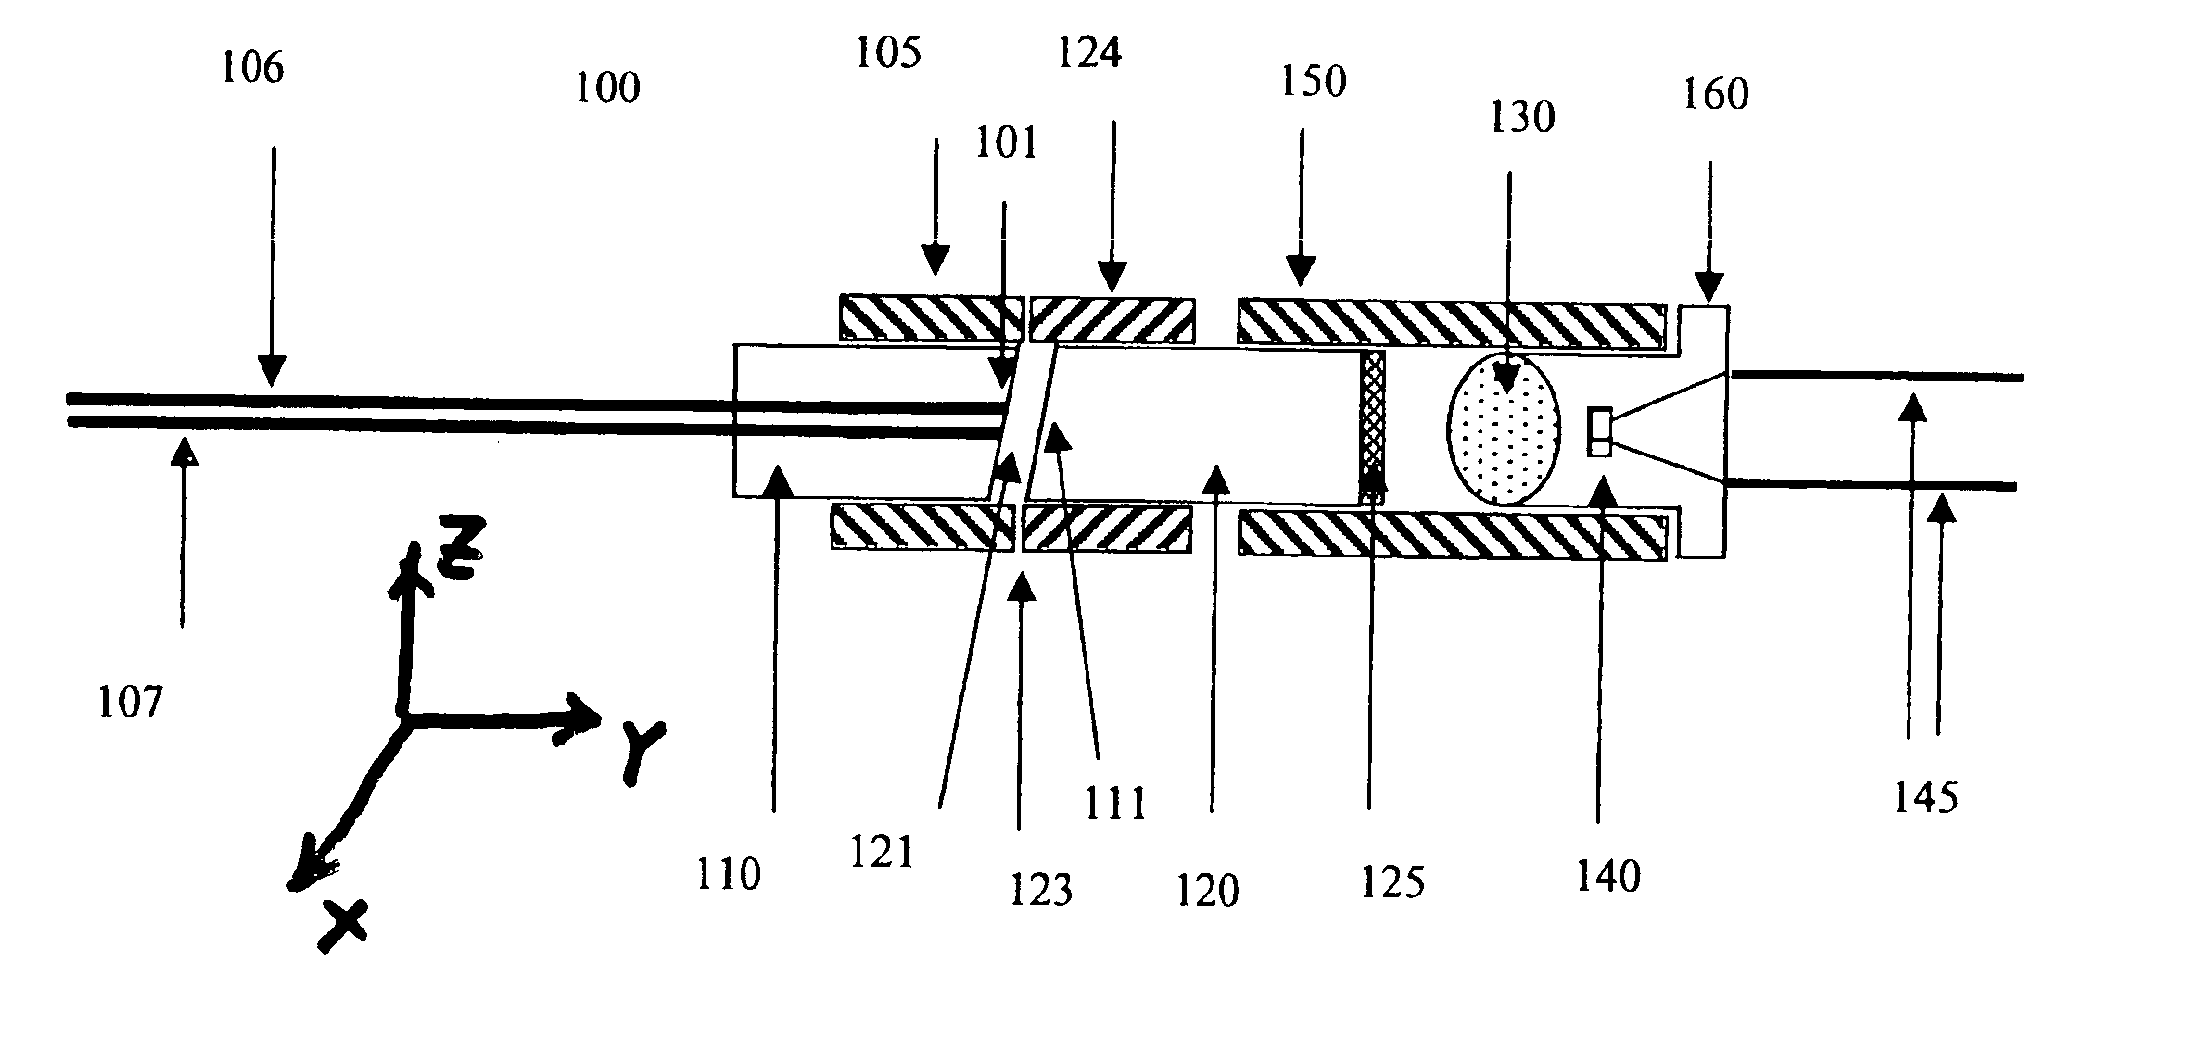 Structure and method for manufacturing compact optical power monitors of highly reliable performance